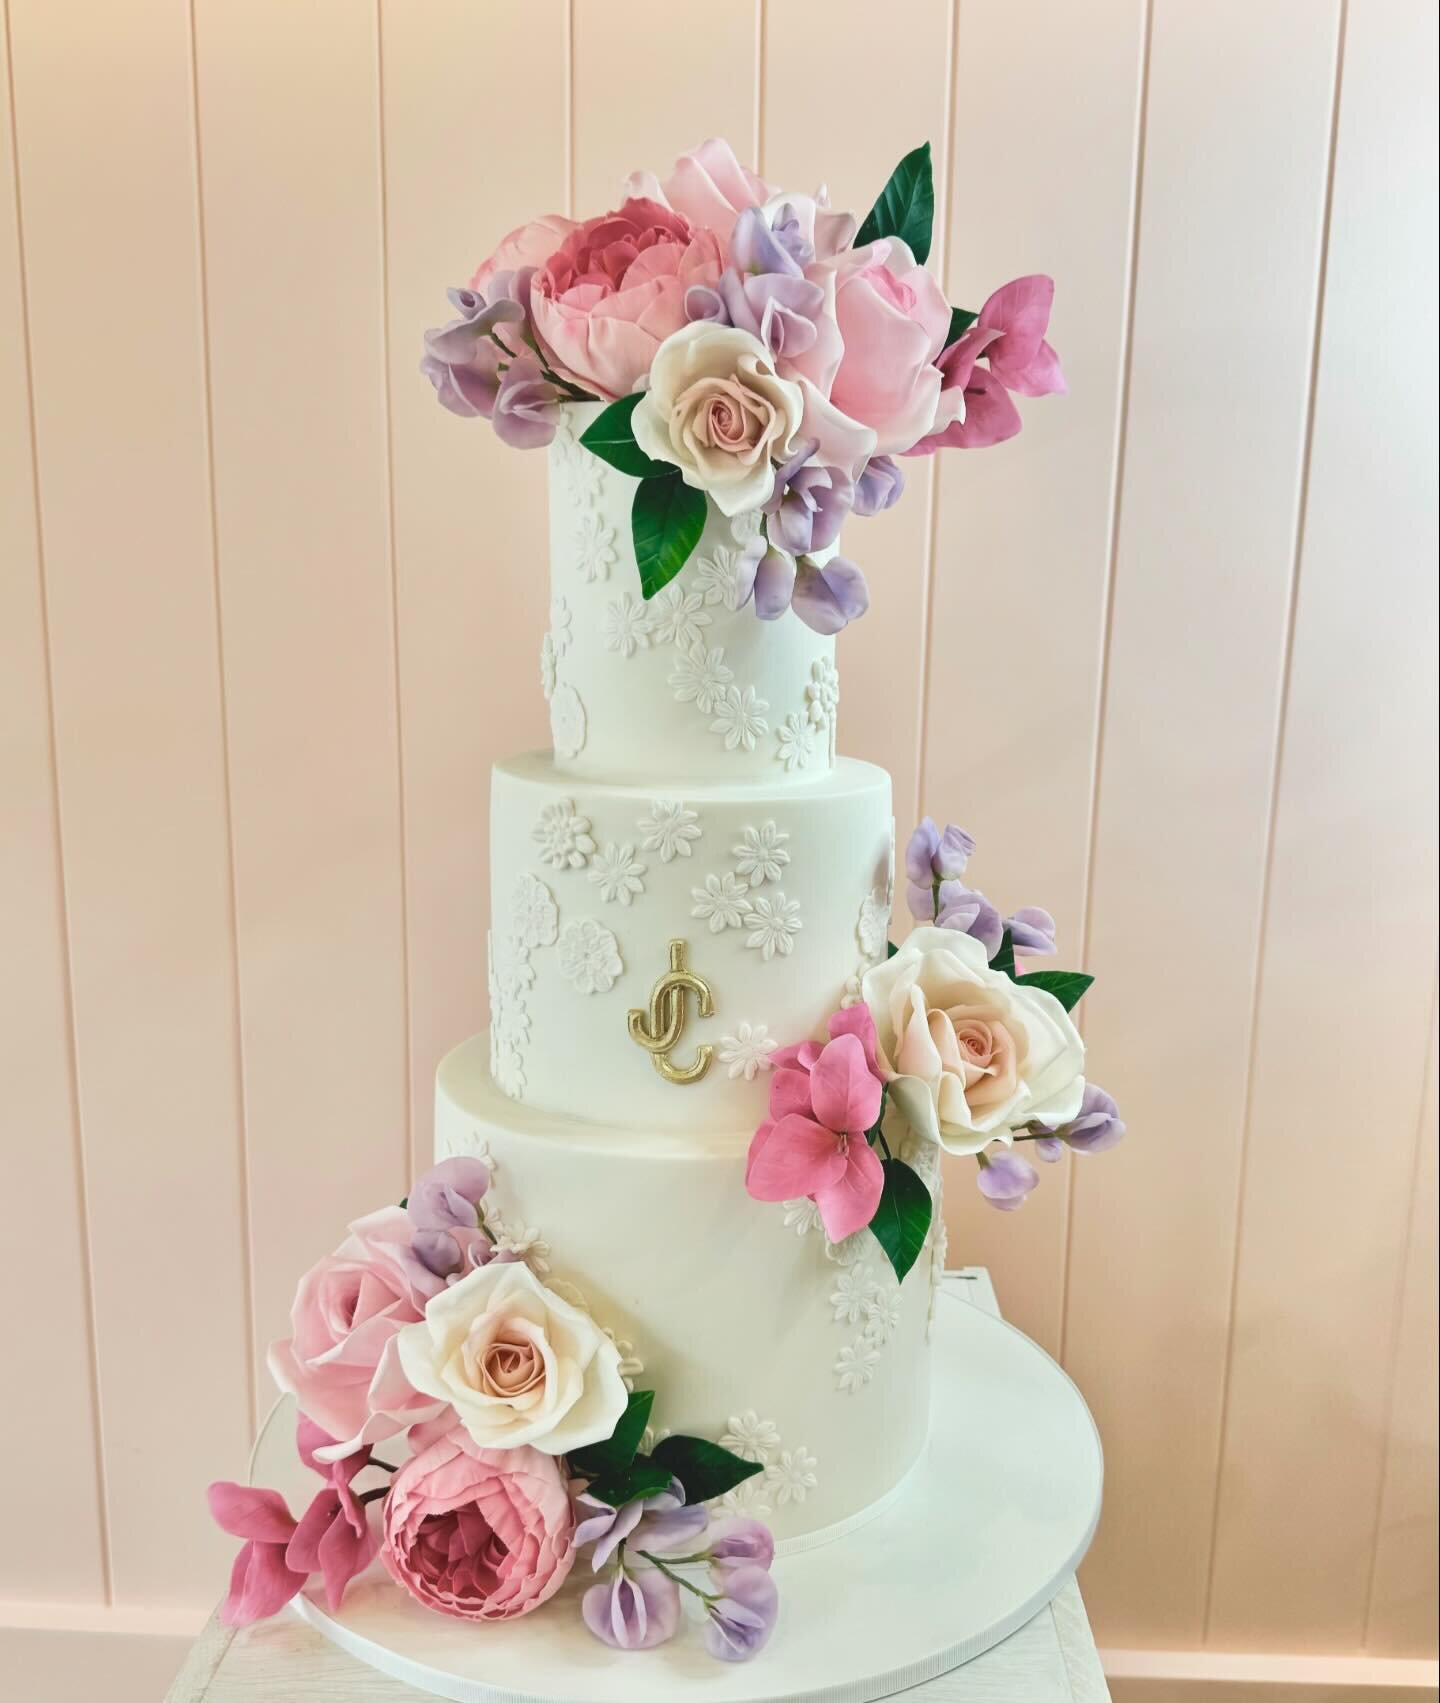 Another abundant floral, I can&rsquo;t get enough of these, so satisfying to see it all come together 
Congratulations Claire and John!

.
.
#sugarflowers #weddingcake #sydneyweddingcake #sydneybride #sydneyweddingcakes #luxurycake #cakedesigner #flo